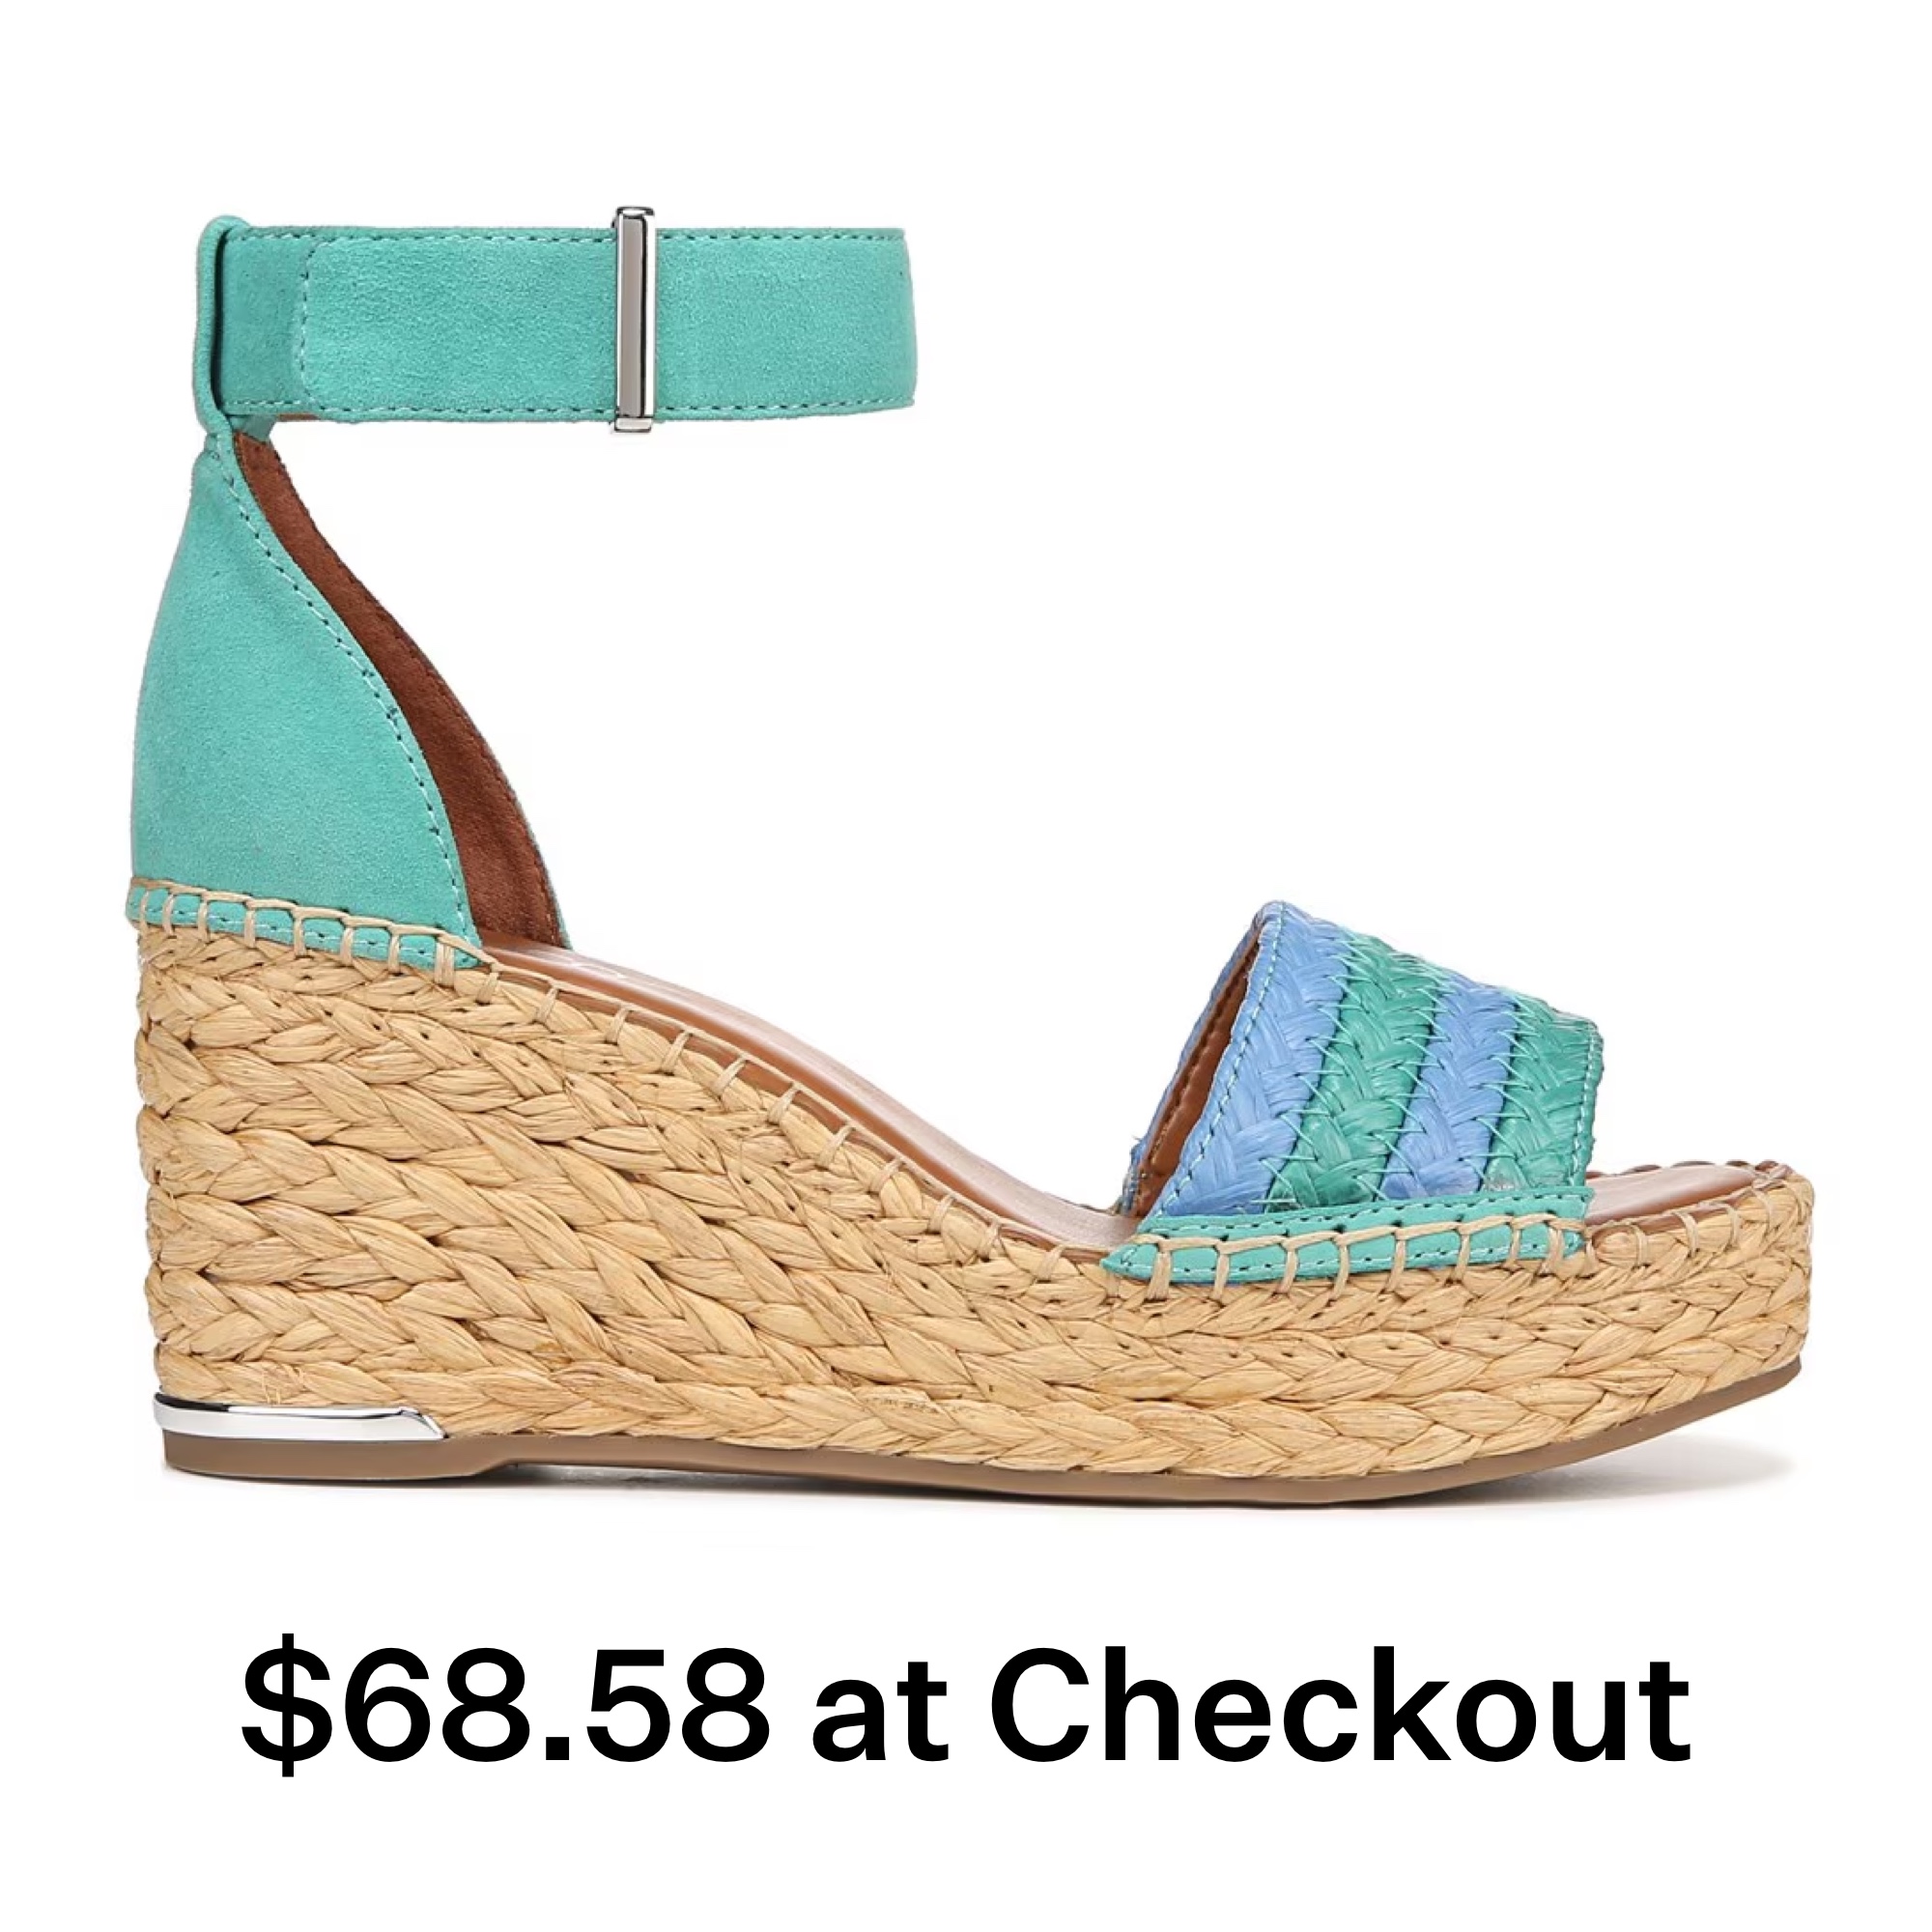 Clemens $68.58 at Checkout